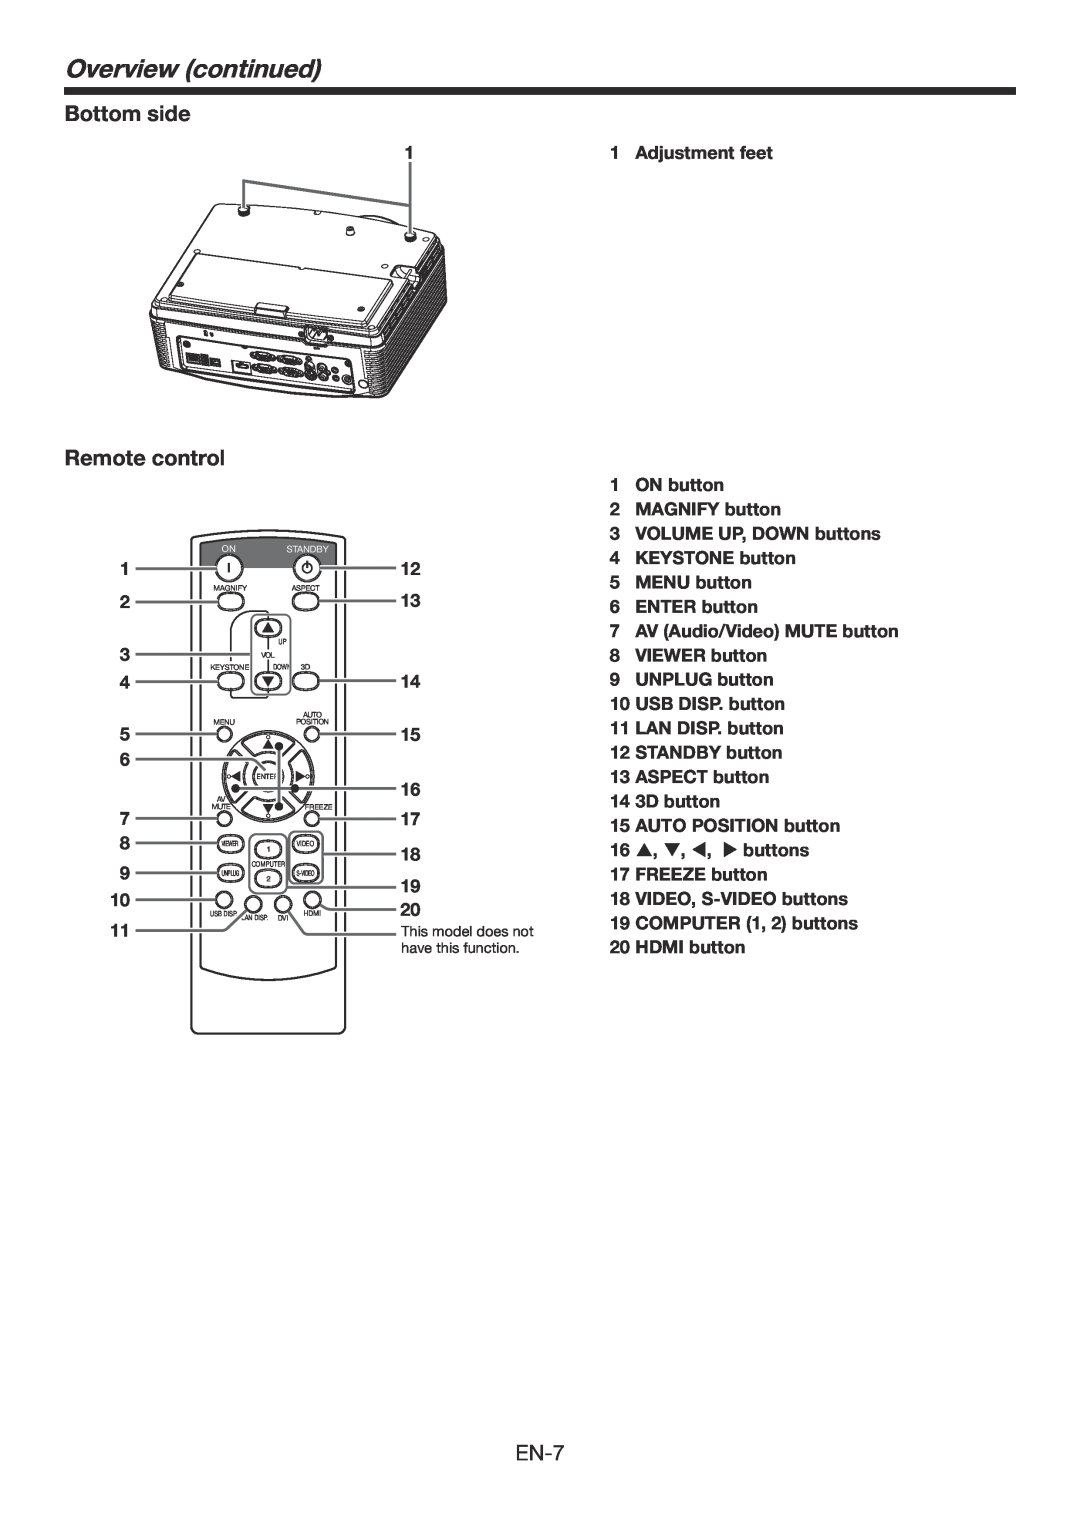 Mitsubishi Electronics WD390U-EST user manual Overview continued, Bottom side, Remote control 